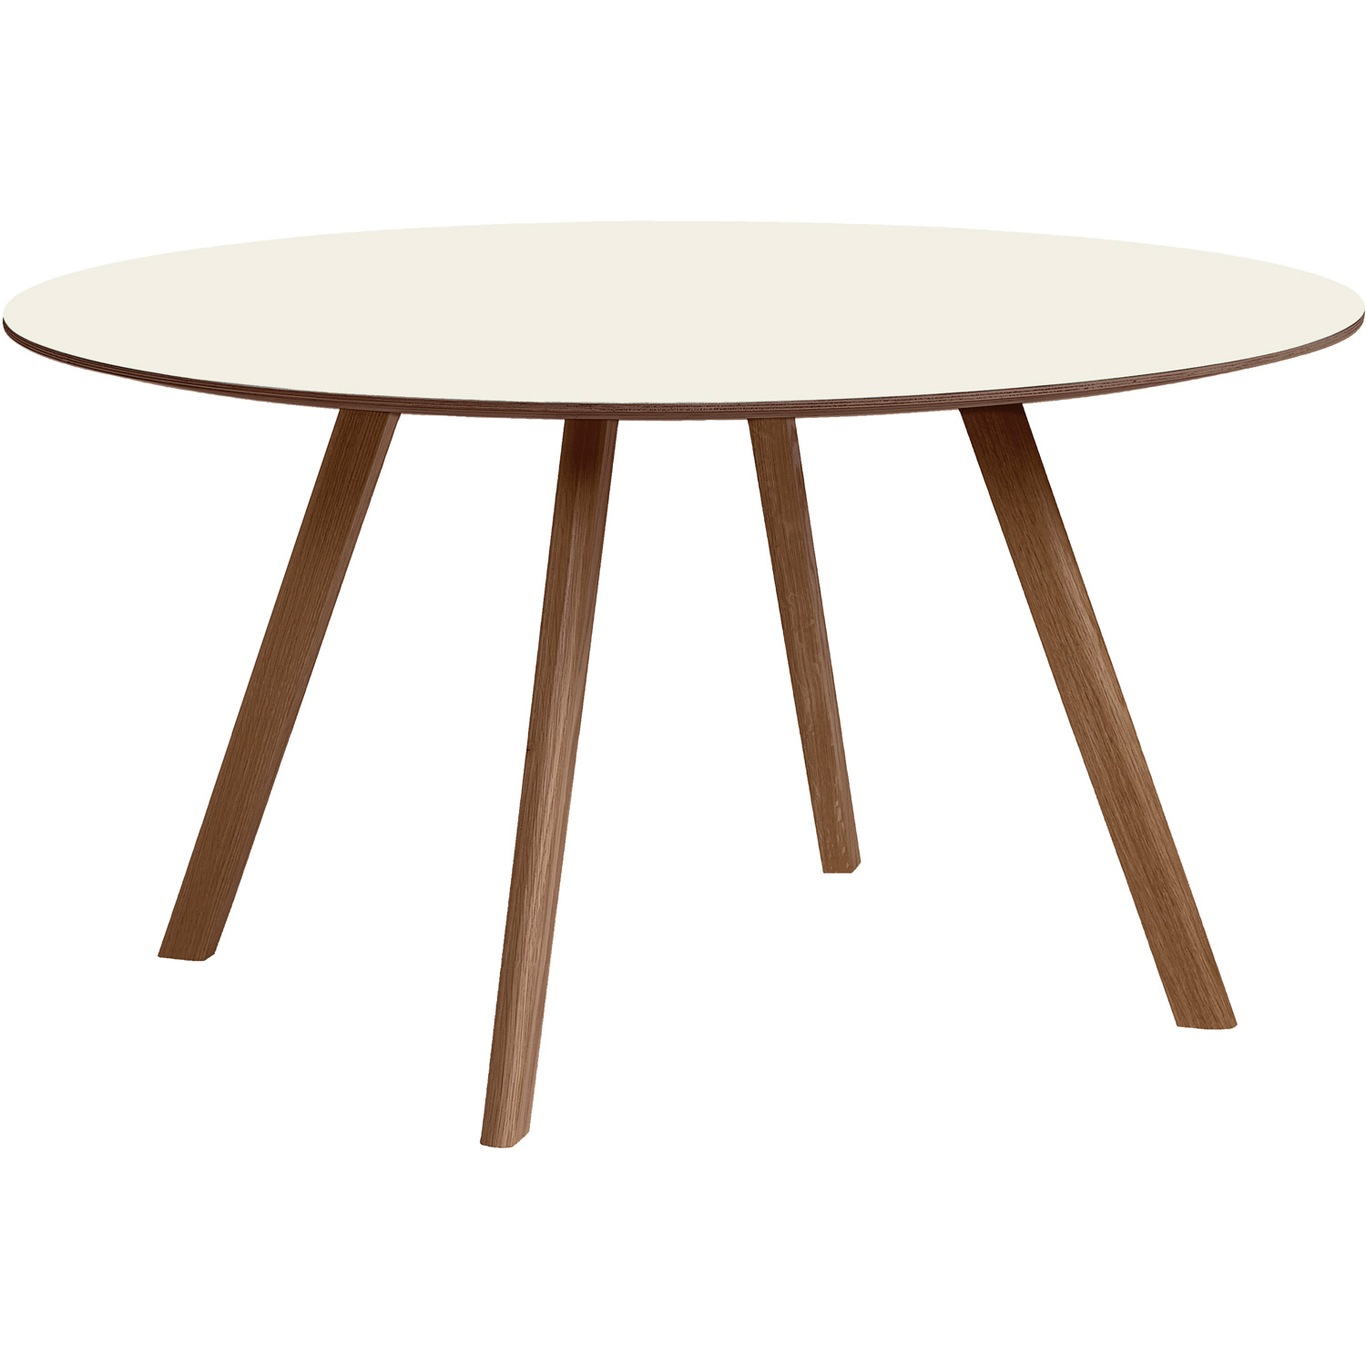 CPH 25 Table Ø140x74 cm, Water based lacquered Walnut / Off-white